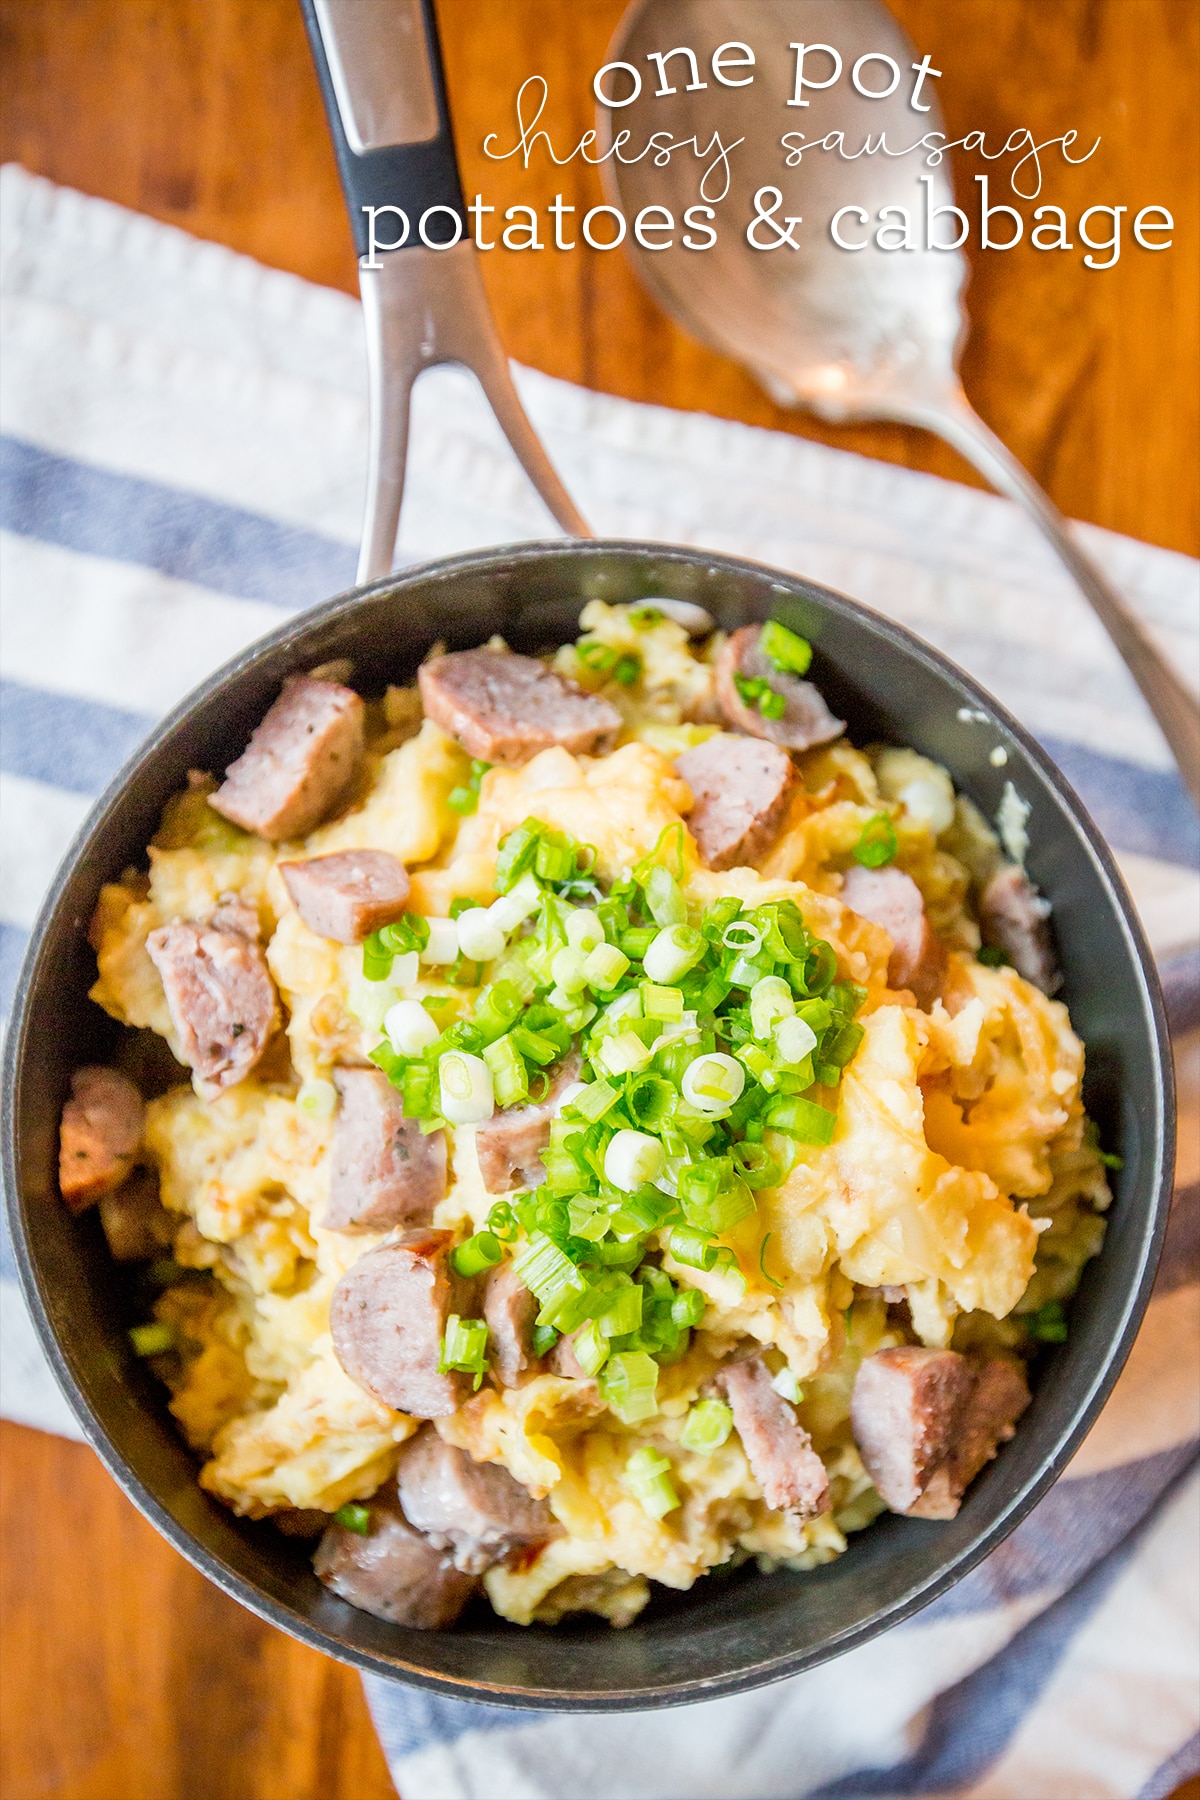 one pot cheesy sausage potatoes and cabbage- my husband asked me to make this again while we were eating it!